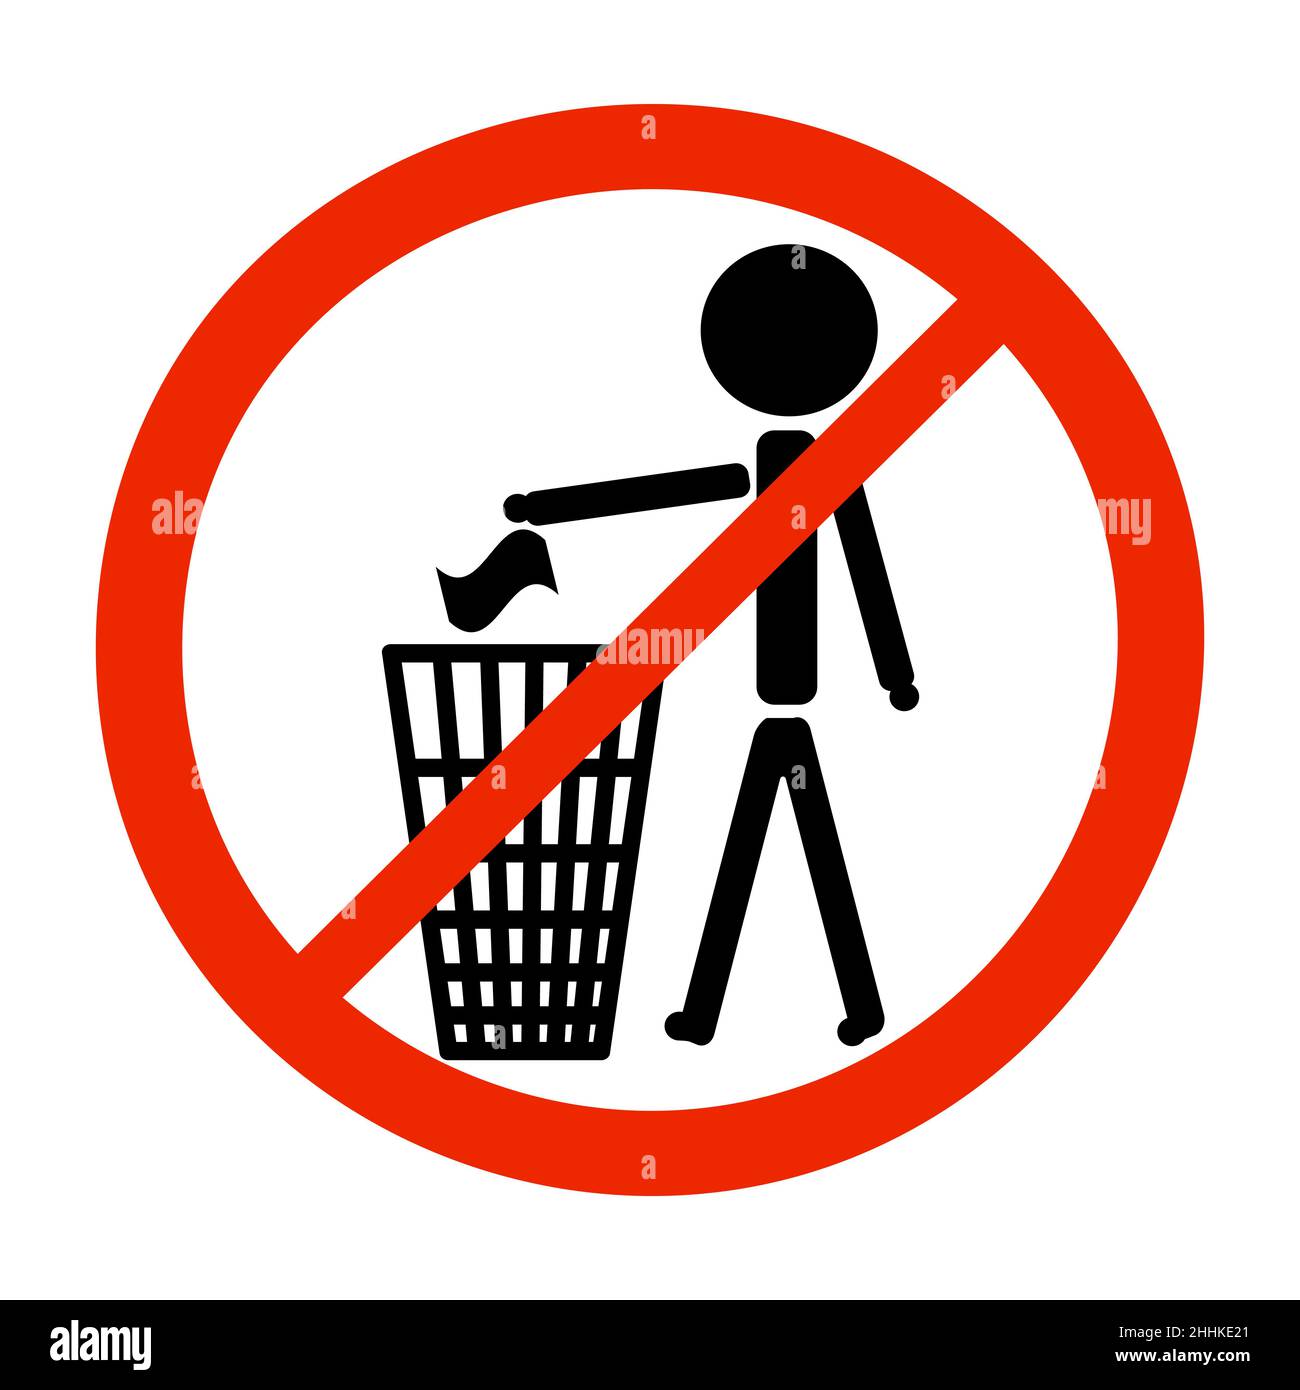 Do not litter symbol isolated on white background.Trash bin with human figure in round red ban sign.Trash icon. Sort garbage.Stock vector illustration Stock Vector